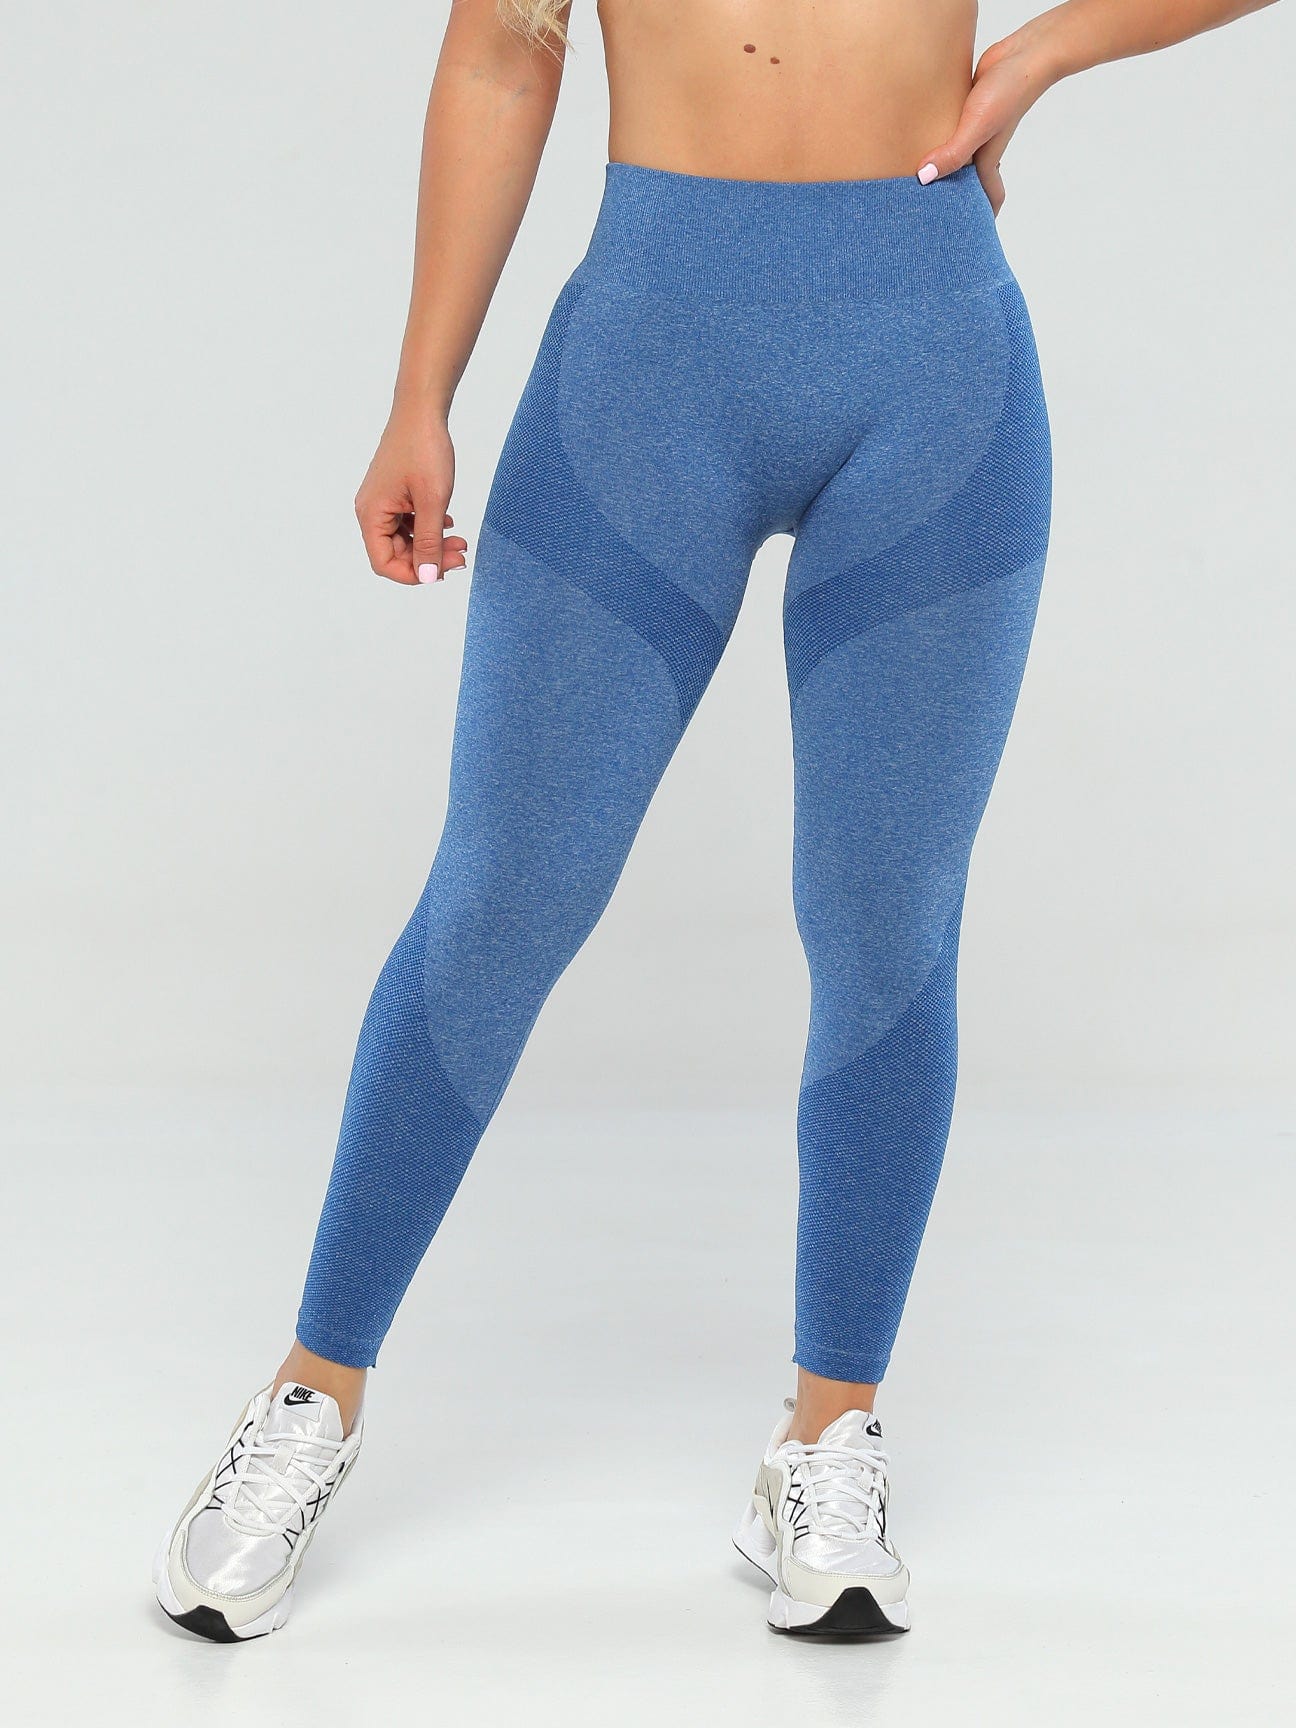 Layla's Celebrity Women Compression Leggings Petite Size High Waisted  Seamless Butt Lifting Leggings